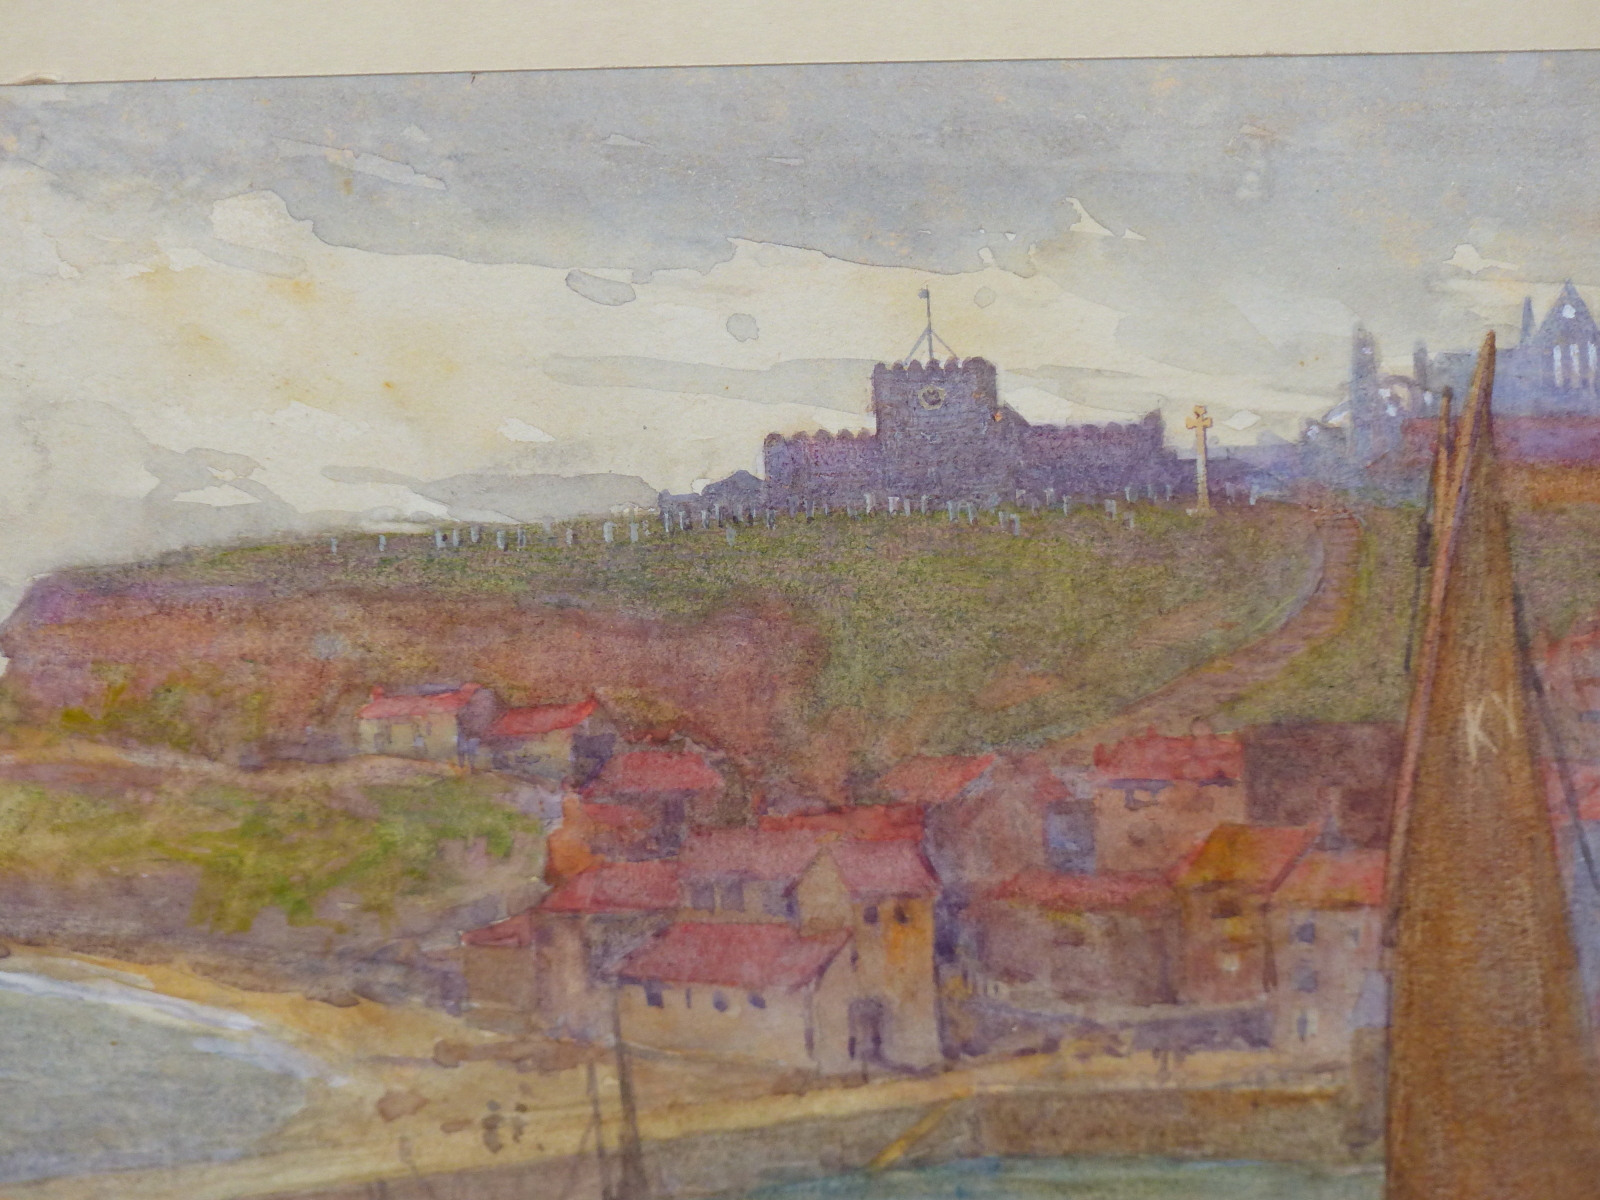 J. C. DRUMMOND, (19th/20th CENTURY) VIEW OF WHITBY, SIGNED AND DATED 1901, WATERCOLOUR, MOUNTED - Image 4 of 7